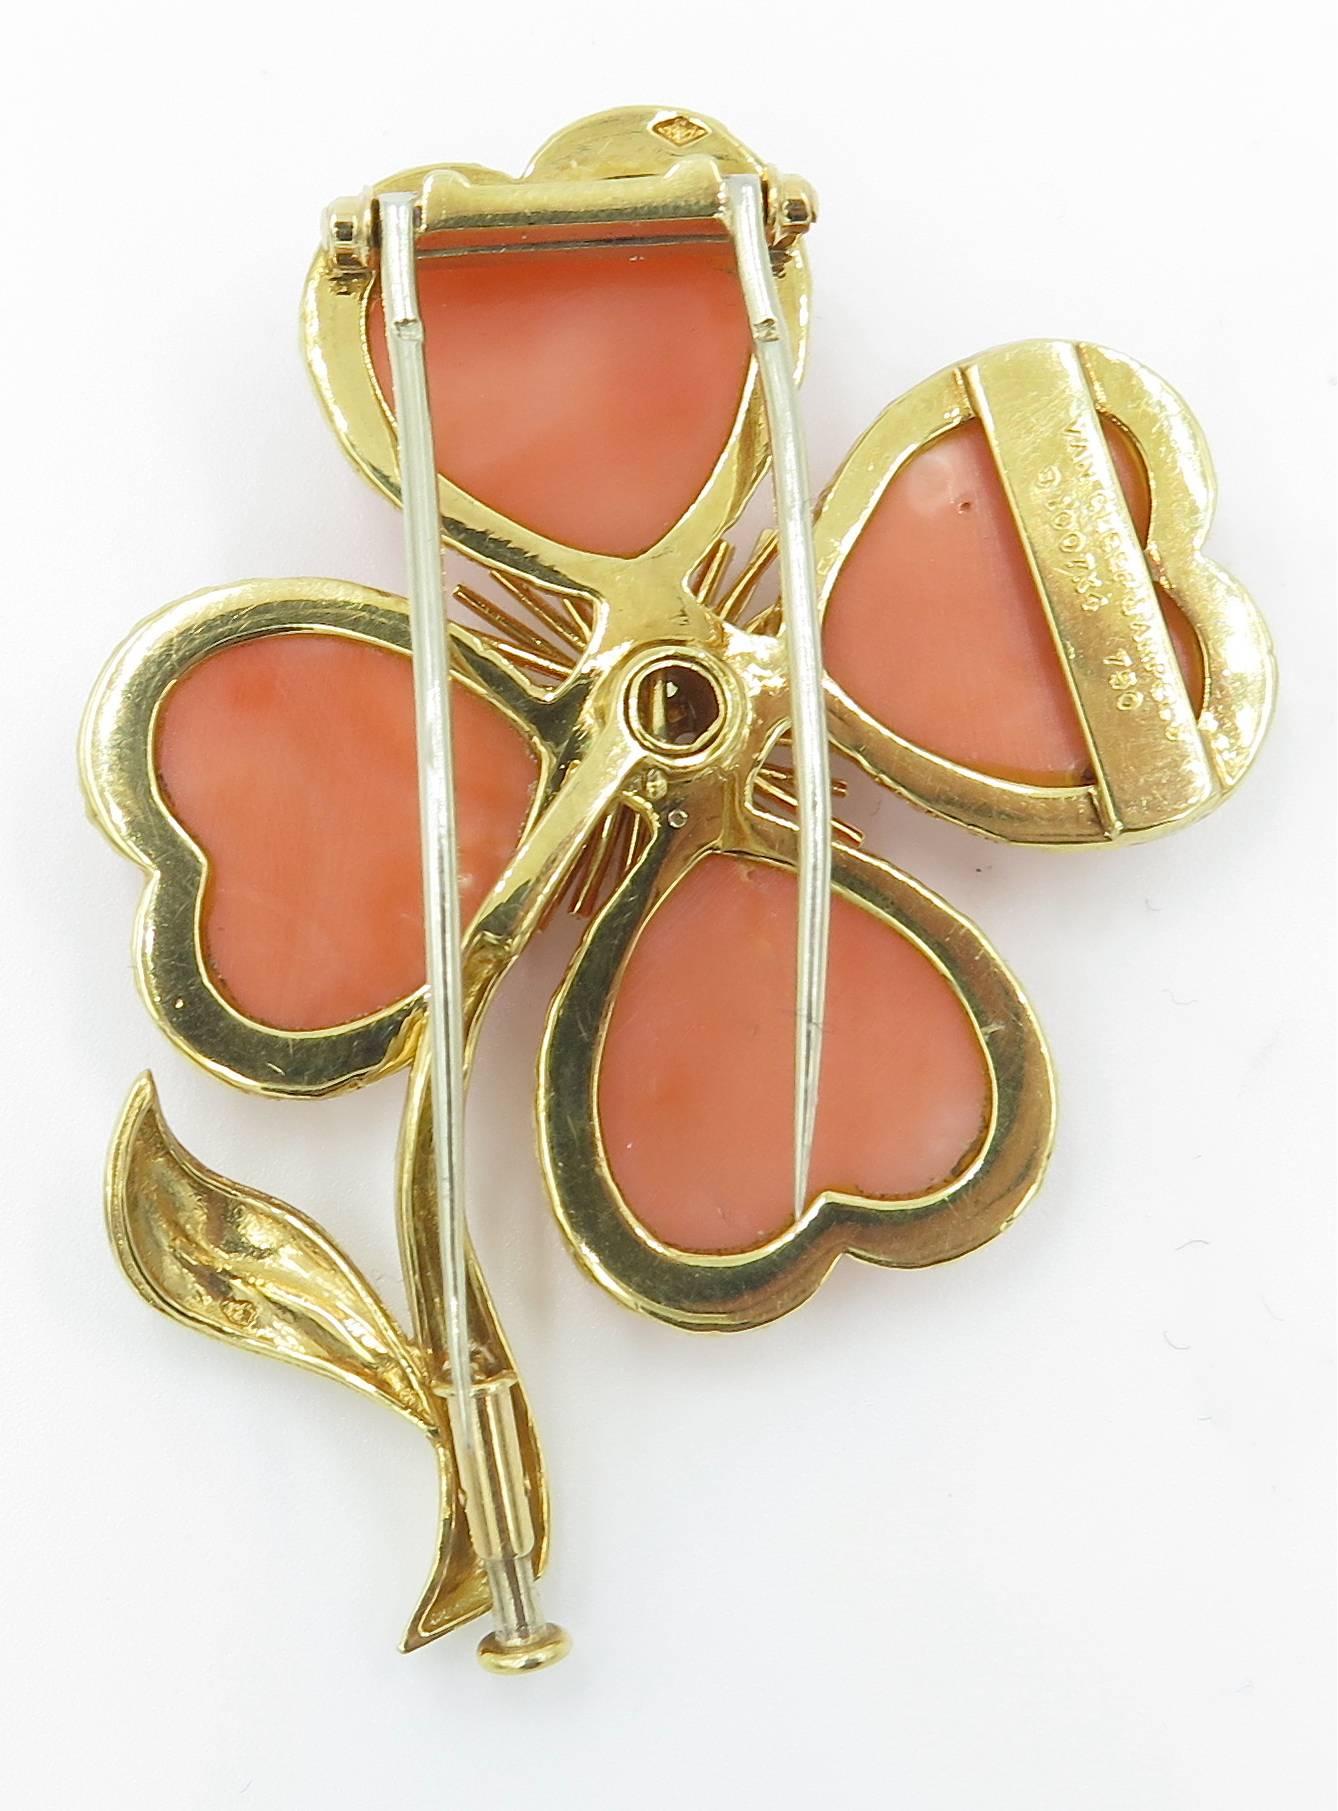 An 18 karat yellow gold, coral and diamond “Cosmos” brooch, Van  Cleef & Arpels. Circa 1960. Numbered B 10074K. Designed as four leaf clover, extending carved heart-shaped coral petals, centering a round brilliant-cut diamond pistill, enhanced by a